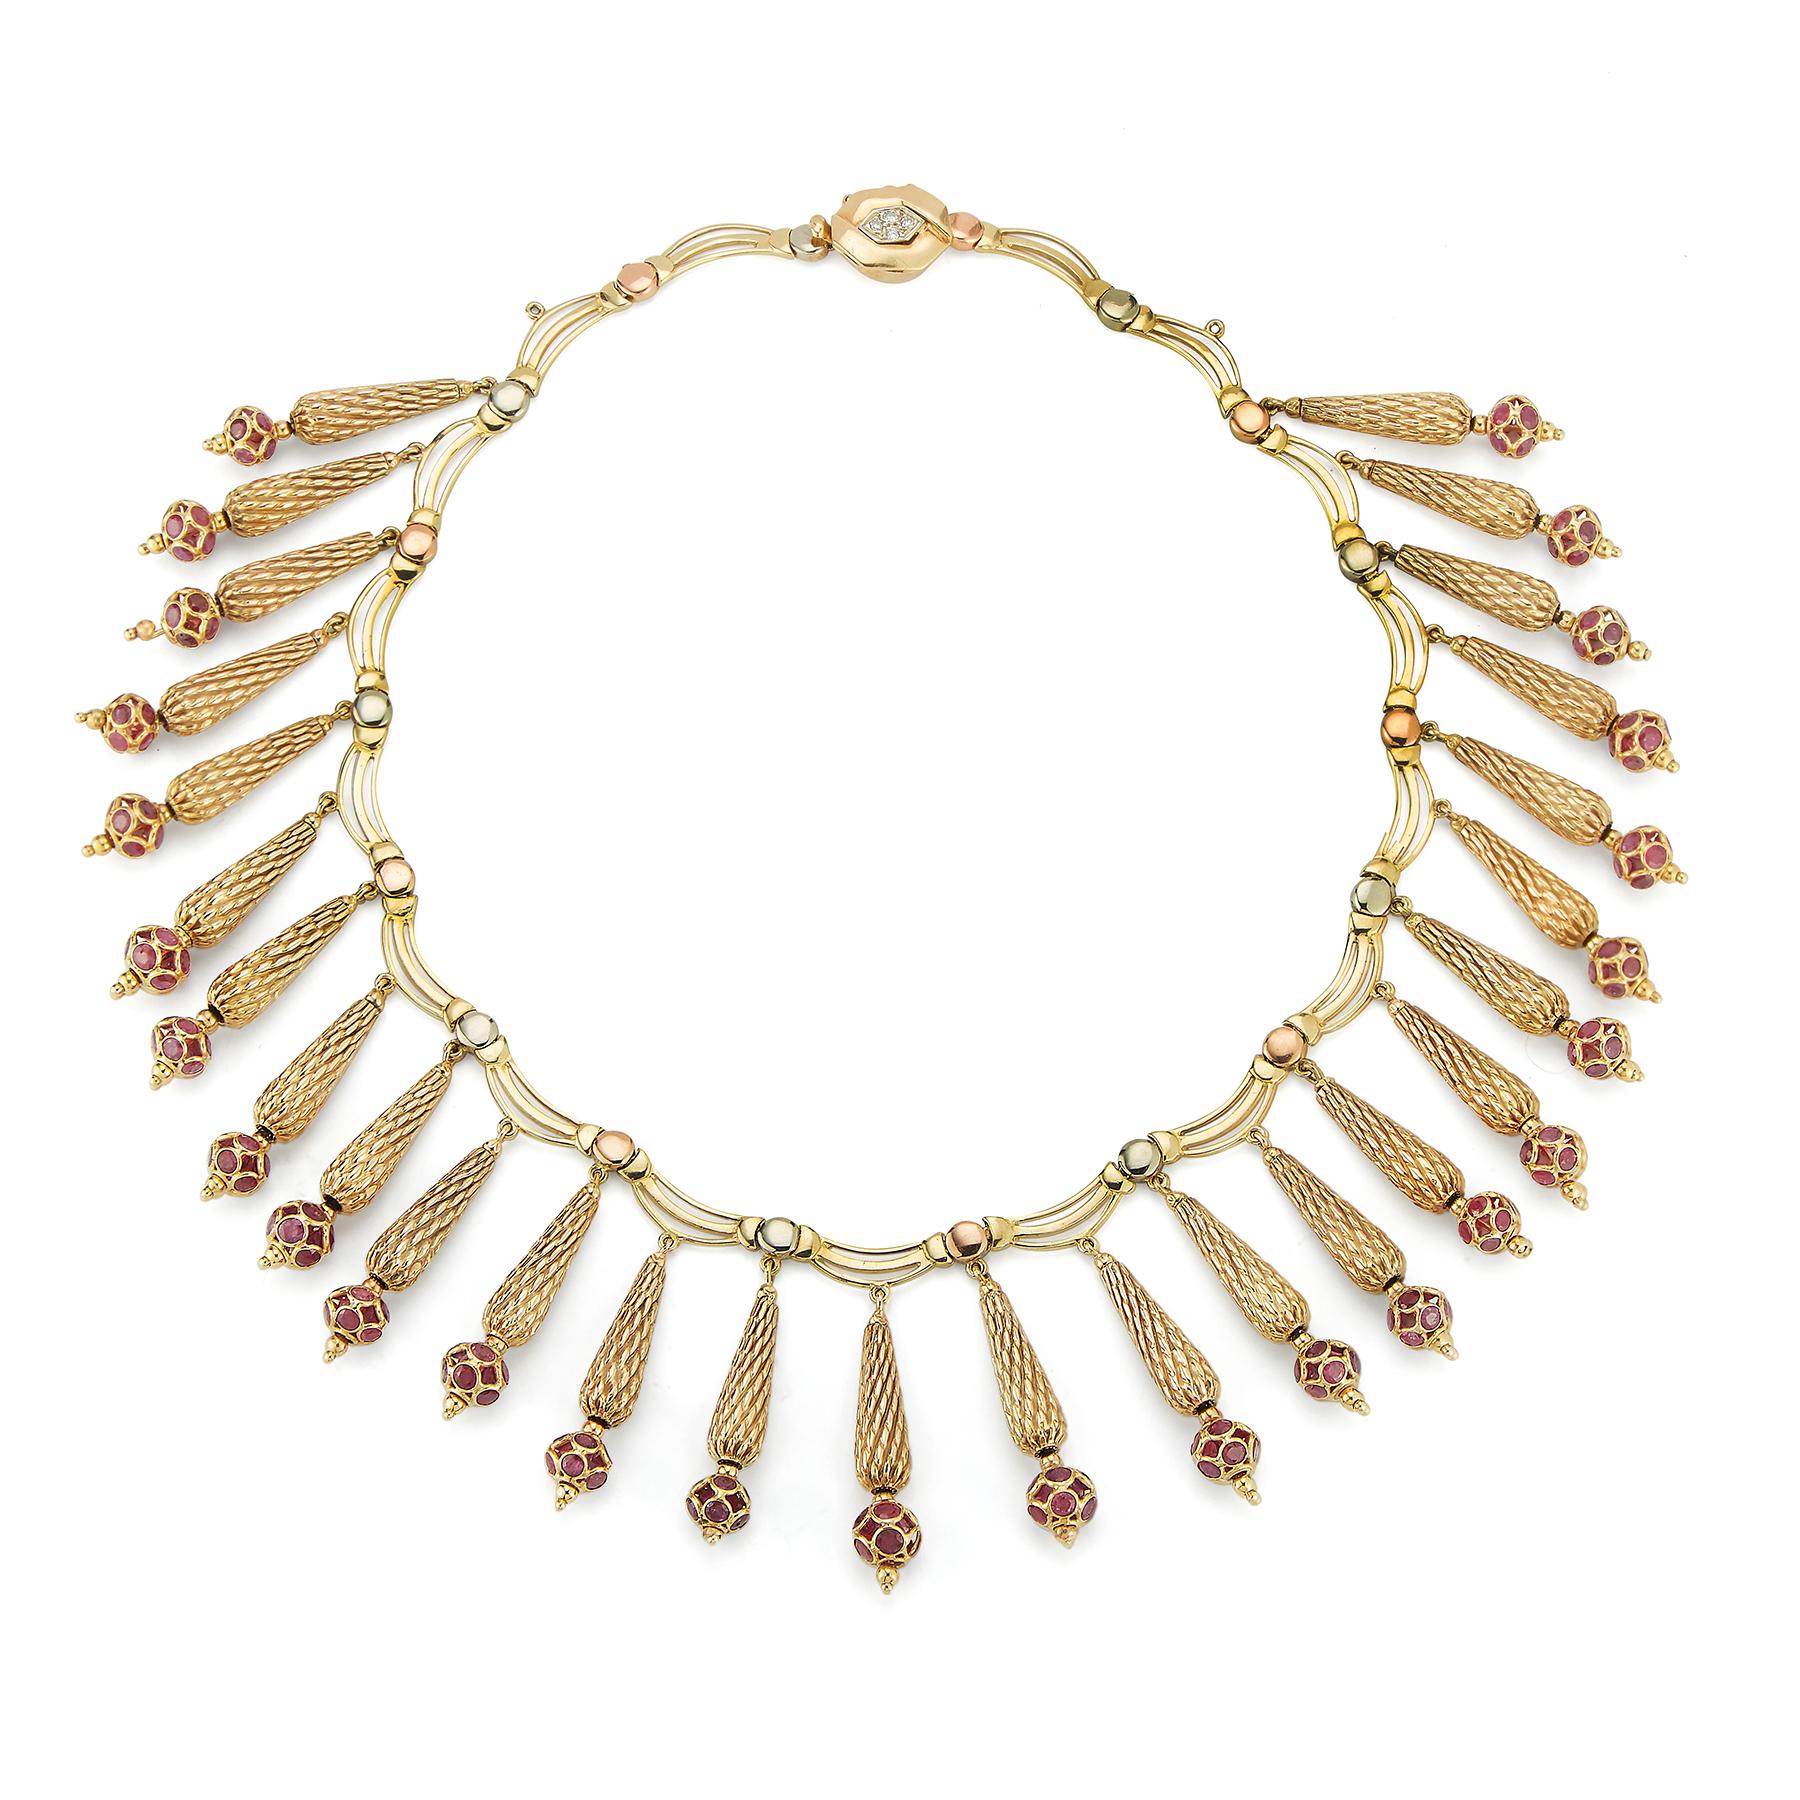 Ruby & Gold Fringe Necklace, 27 hammered gold fringes attaching ruby round cut rubies set in 14k yellow gold

Measurements: 13.5